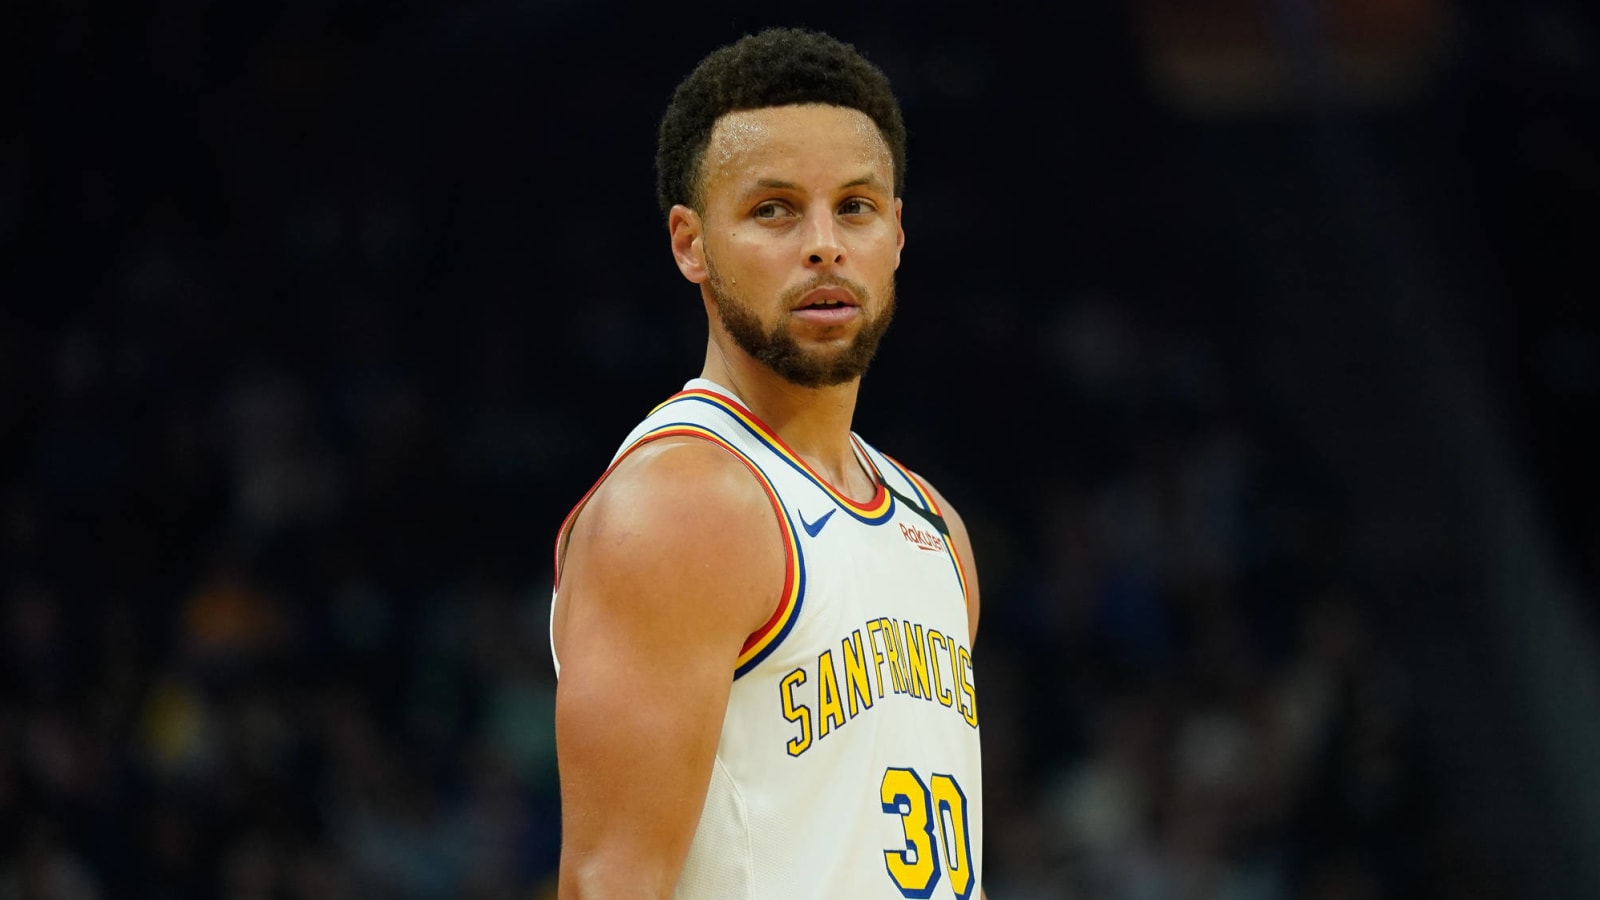 Steph Curry shows off new braids hairstyle